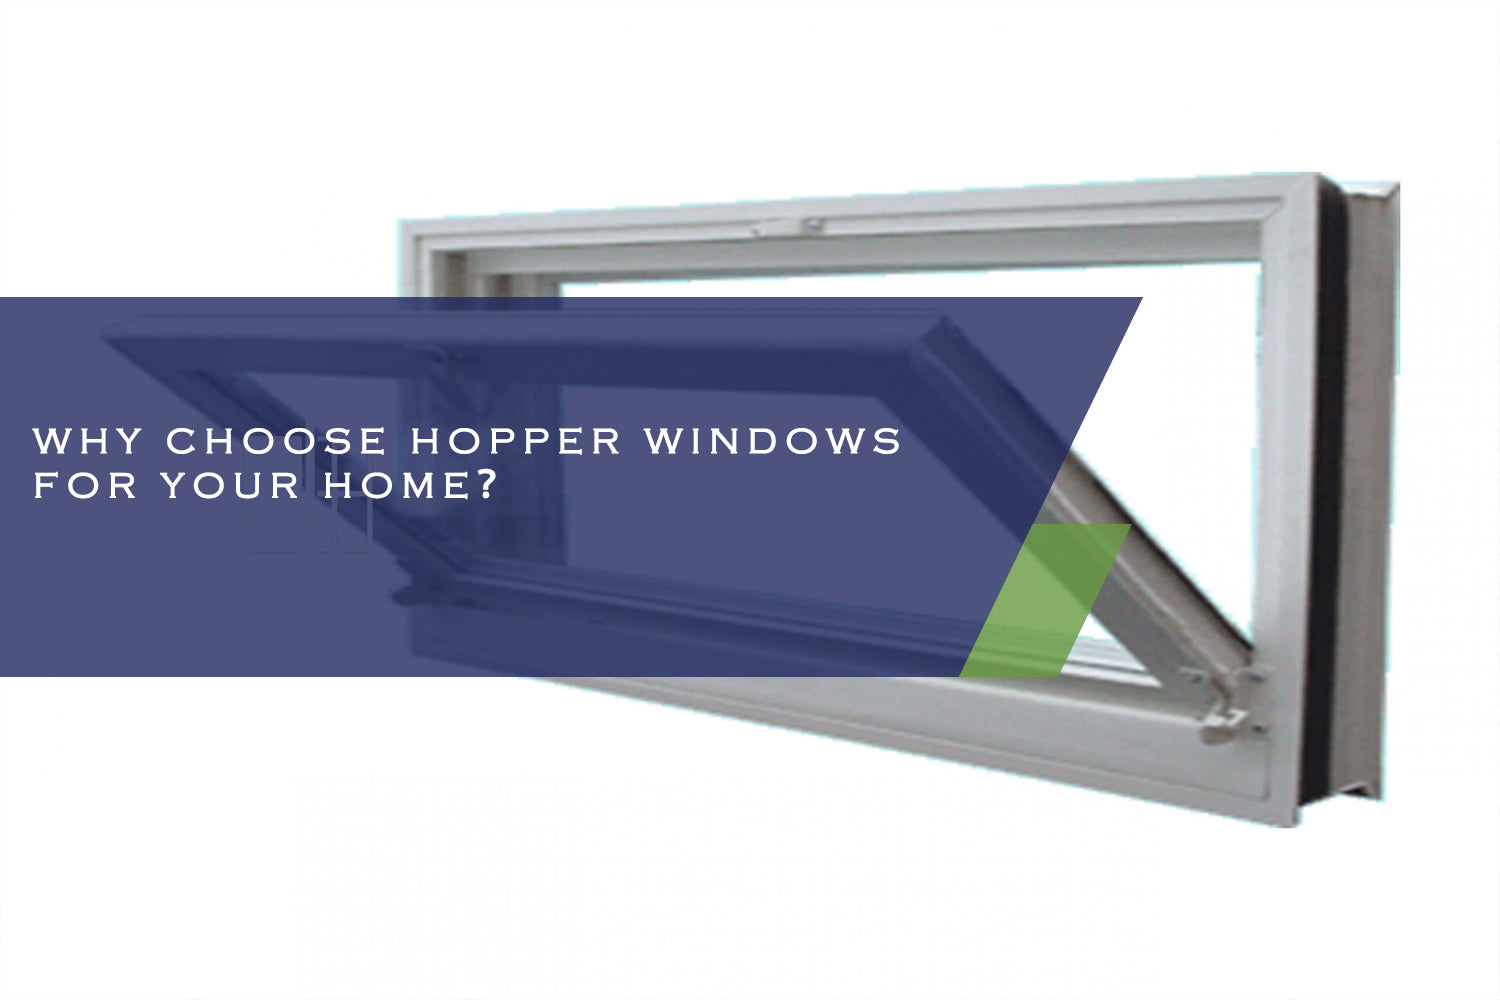 Why Choose Hopper Windows for Your Home？